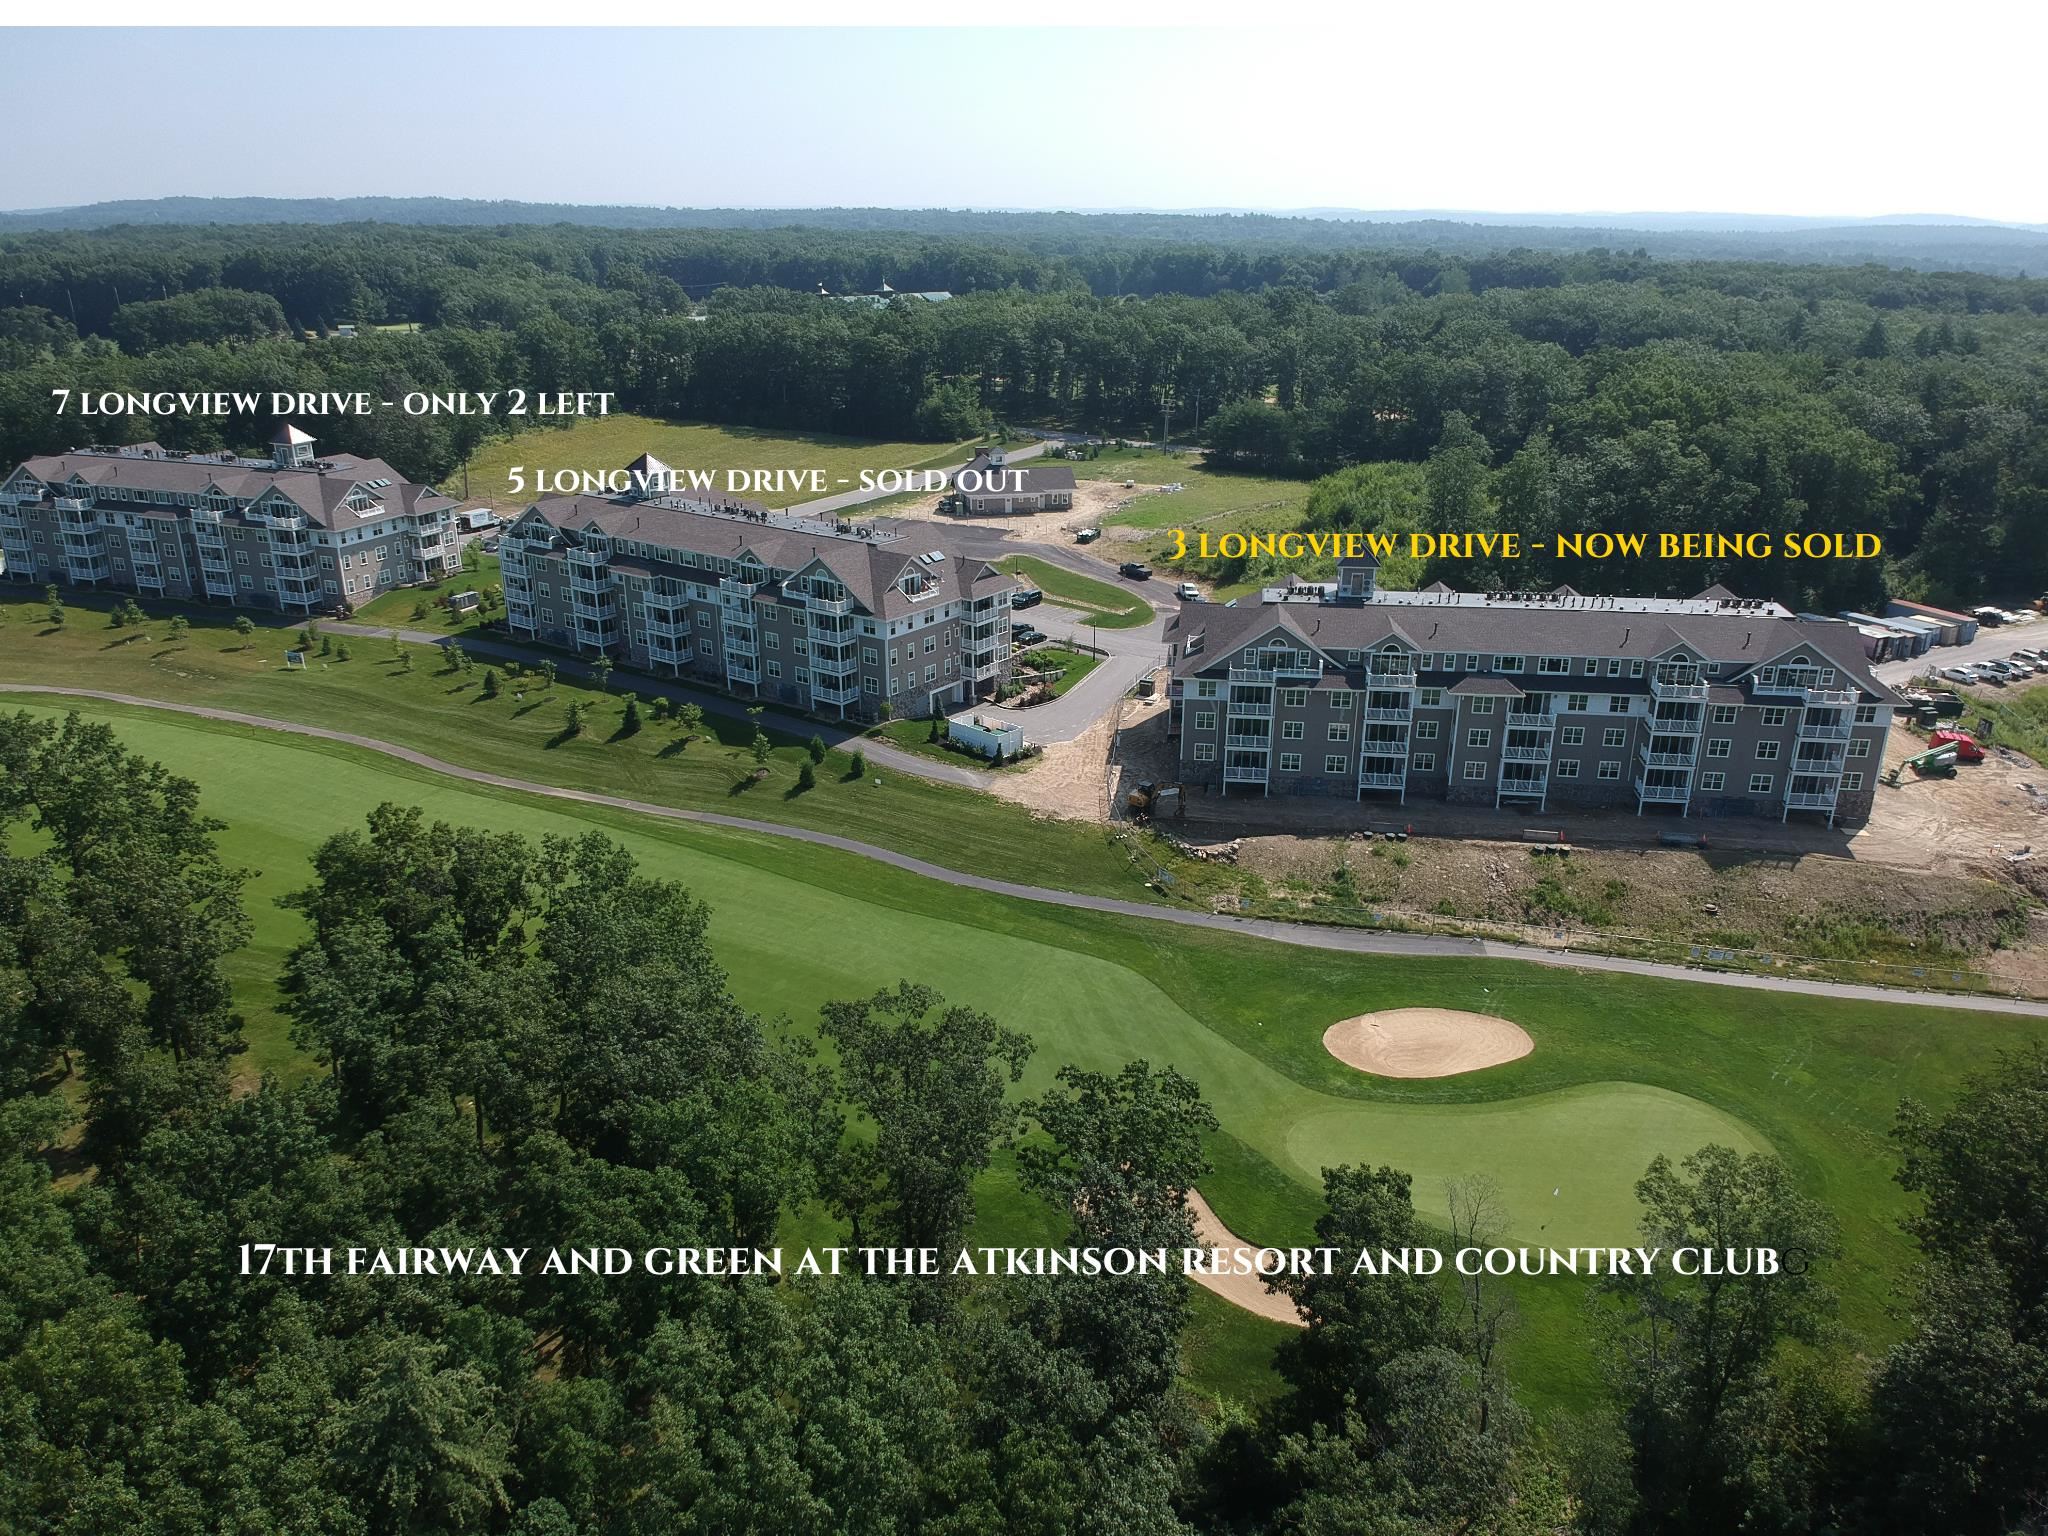 AERIAL VIEW OF BUILDING 4,5 AND 6 OVERLOOKING THE 17TH HOLE